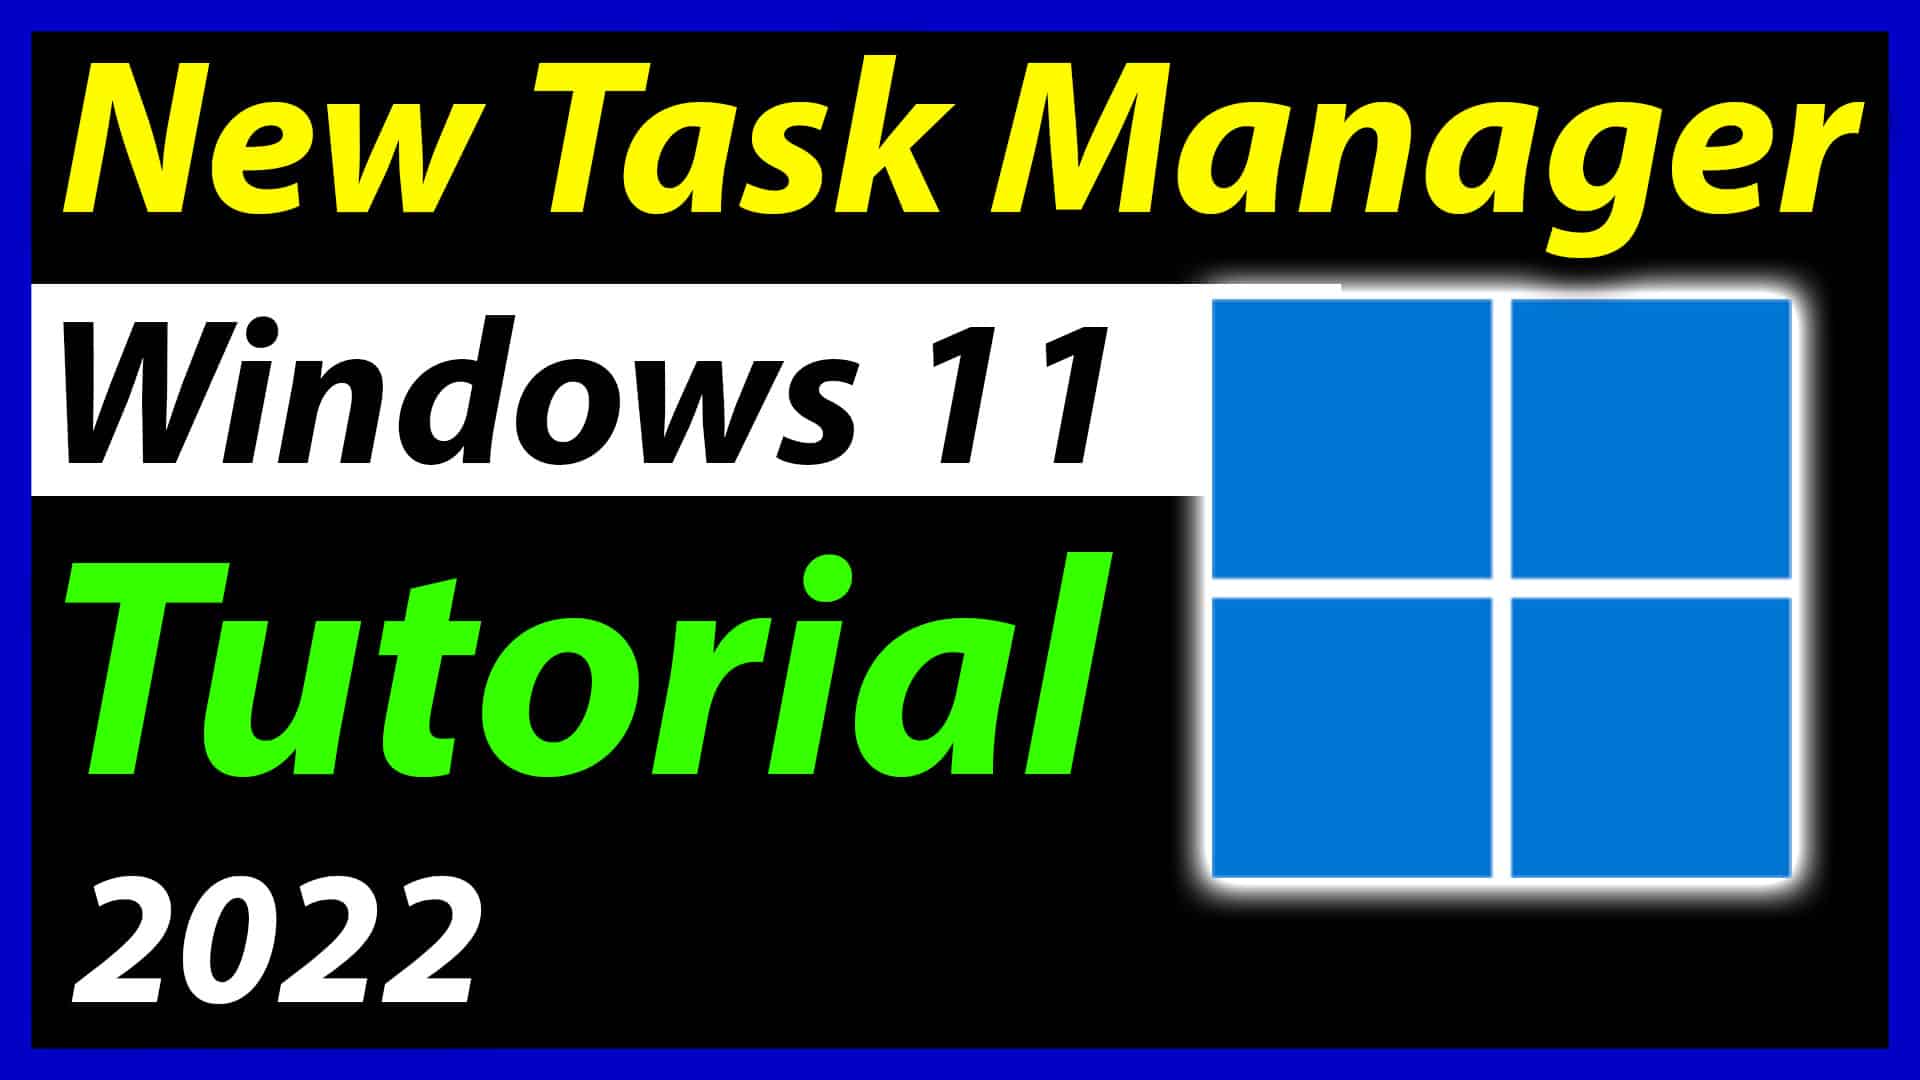 How to enable New Task Manager on Windows 11